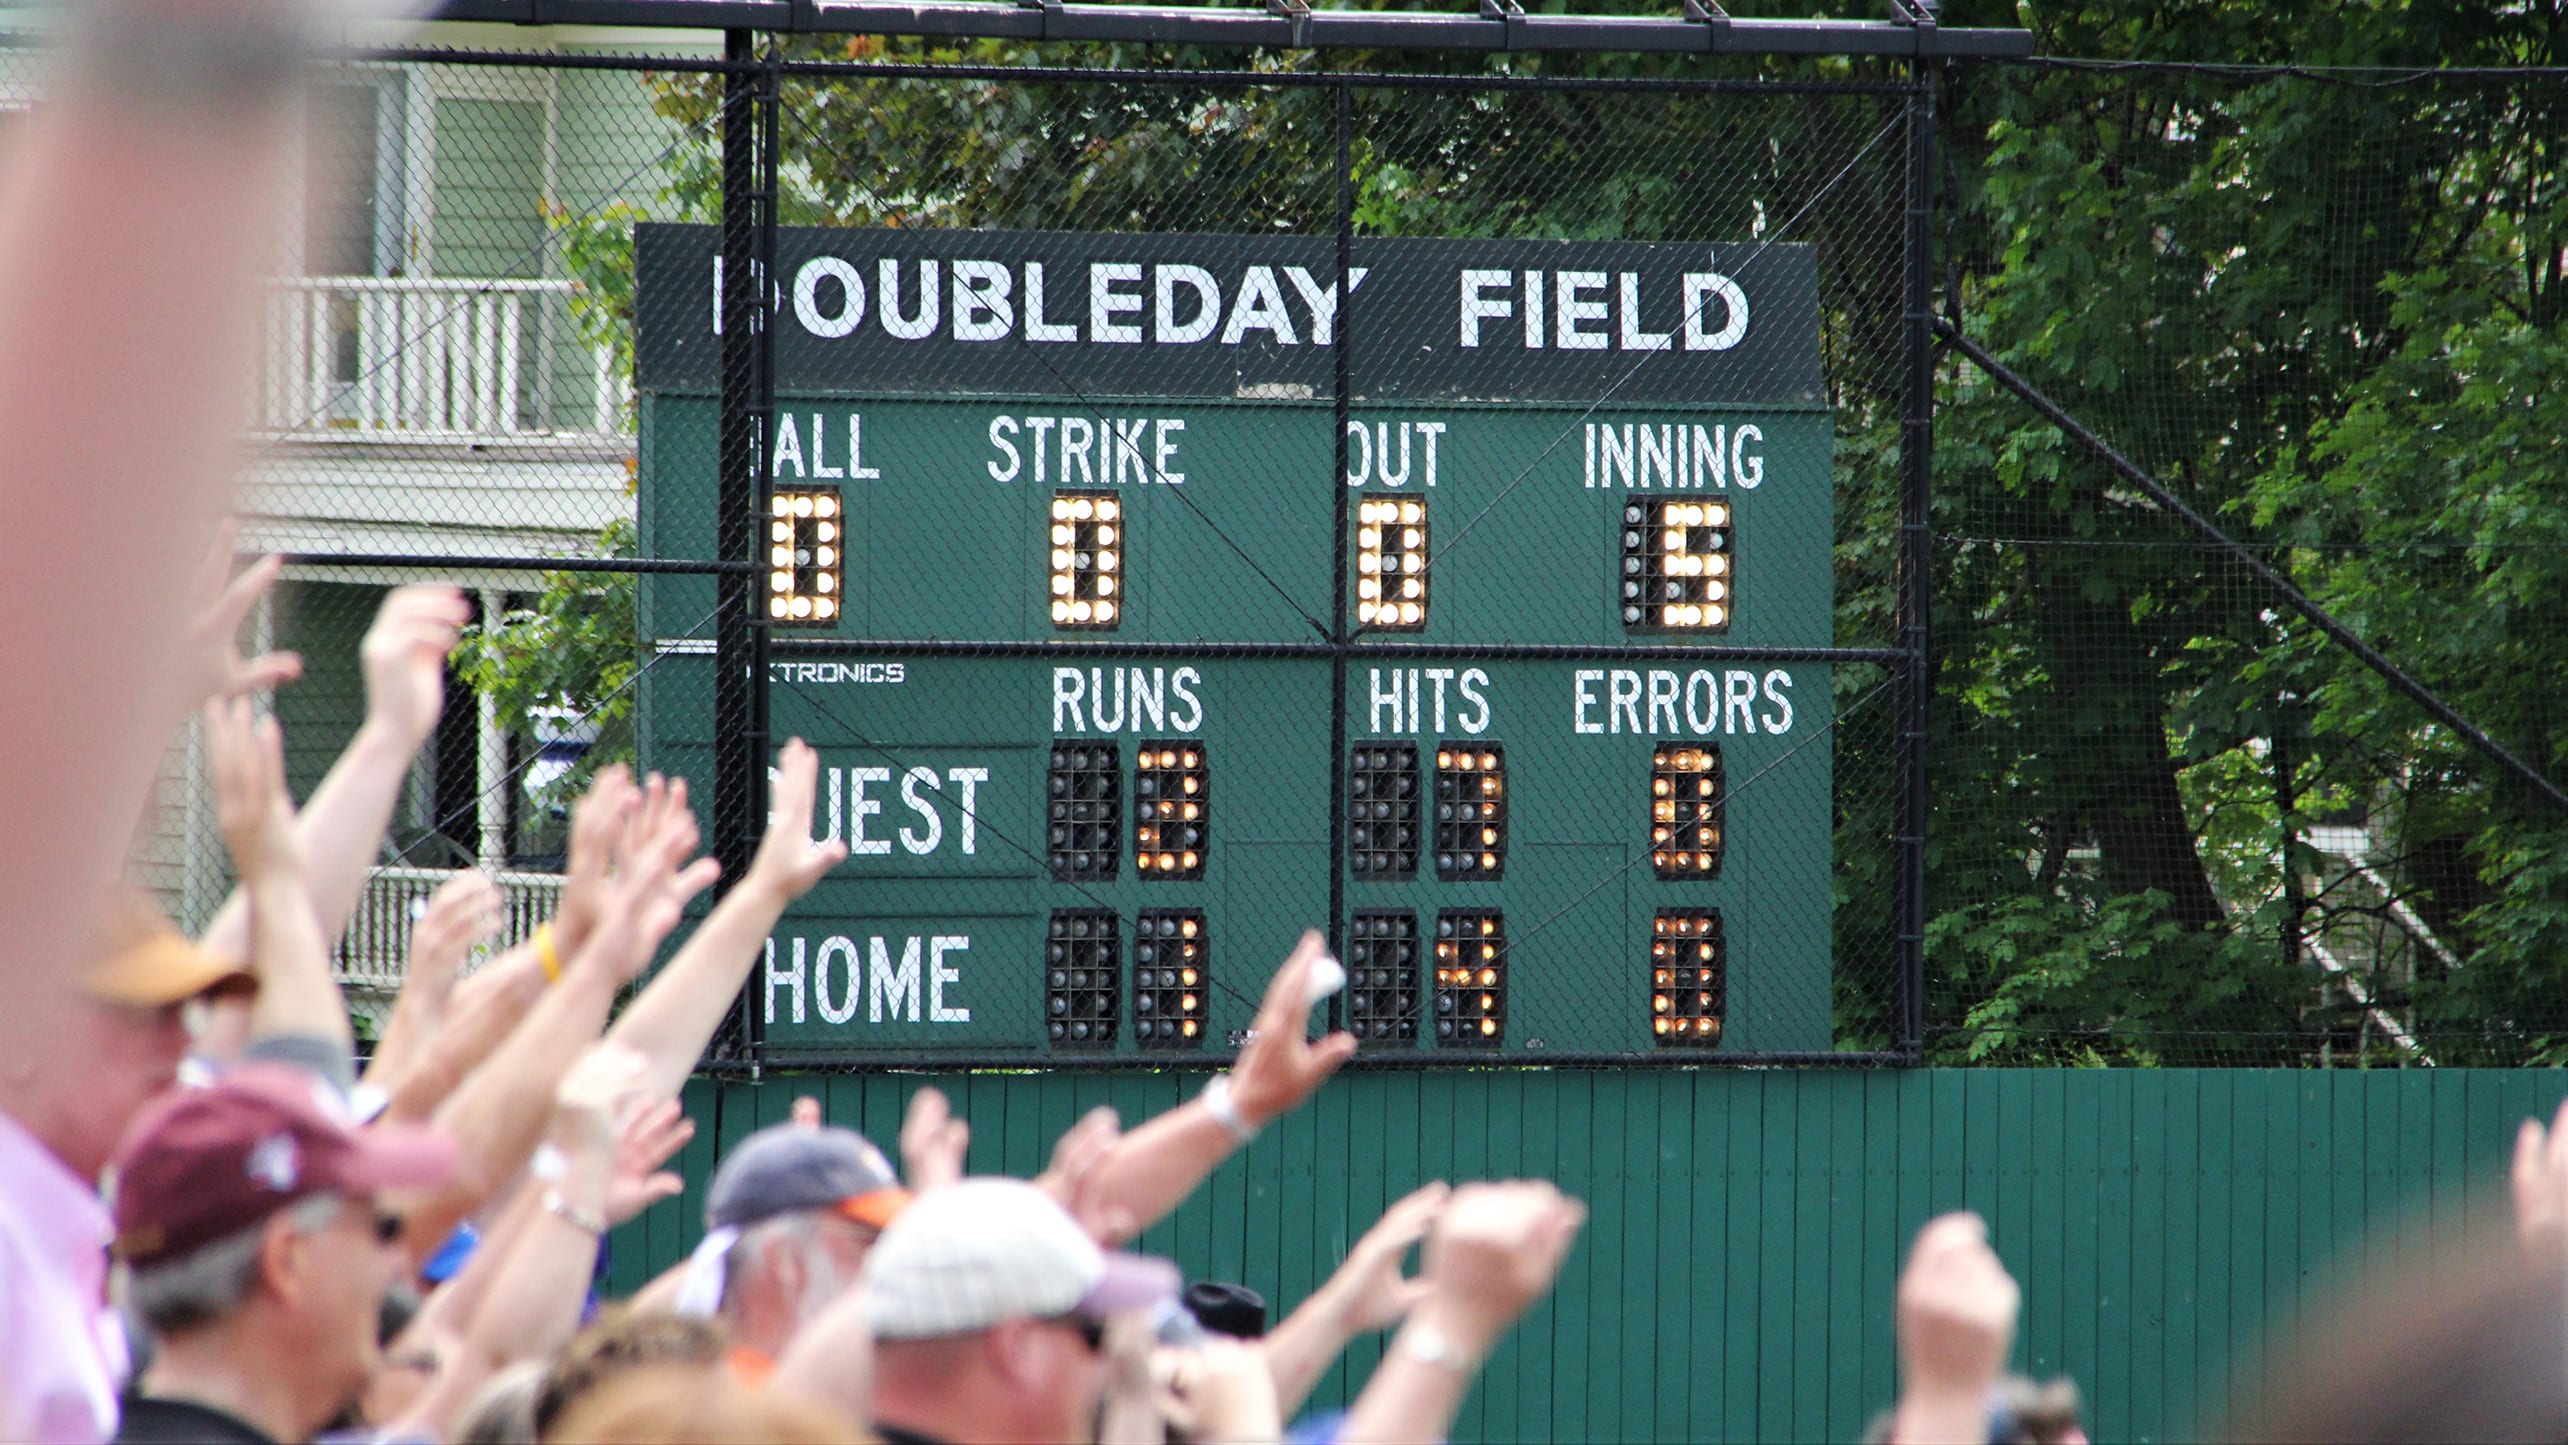 Cooperstown's Doubleday Field will be the site of the Hall of Fame's East-West Classic on Saturday